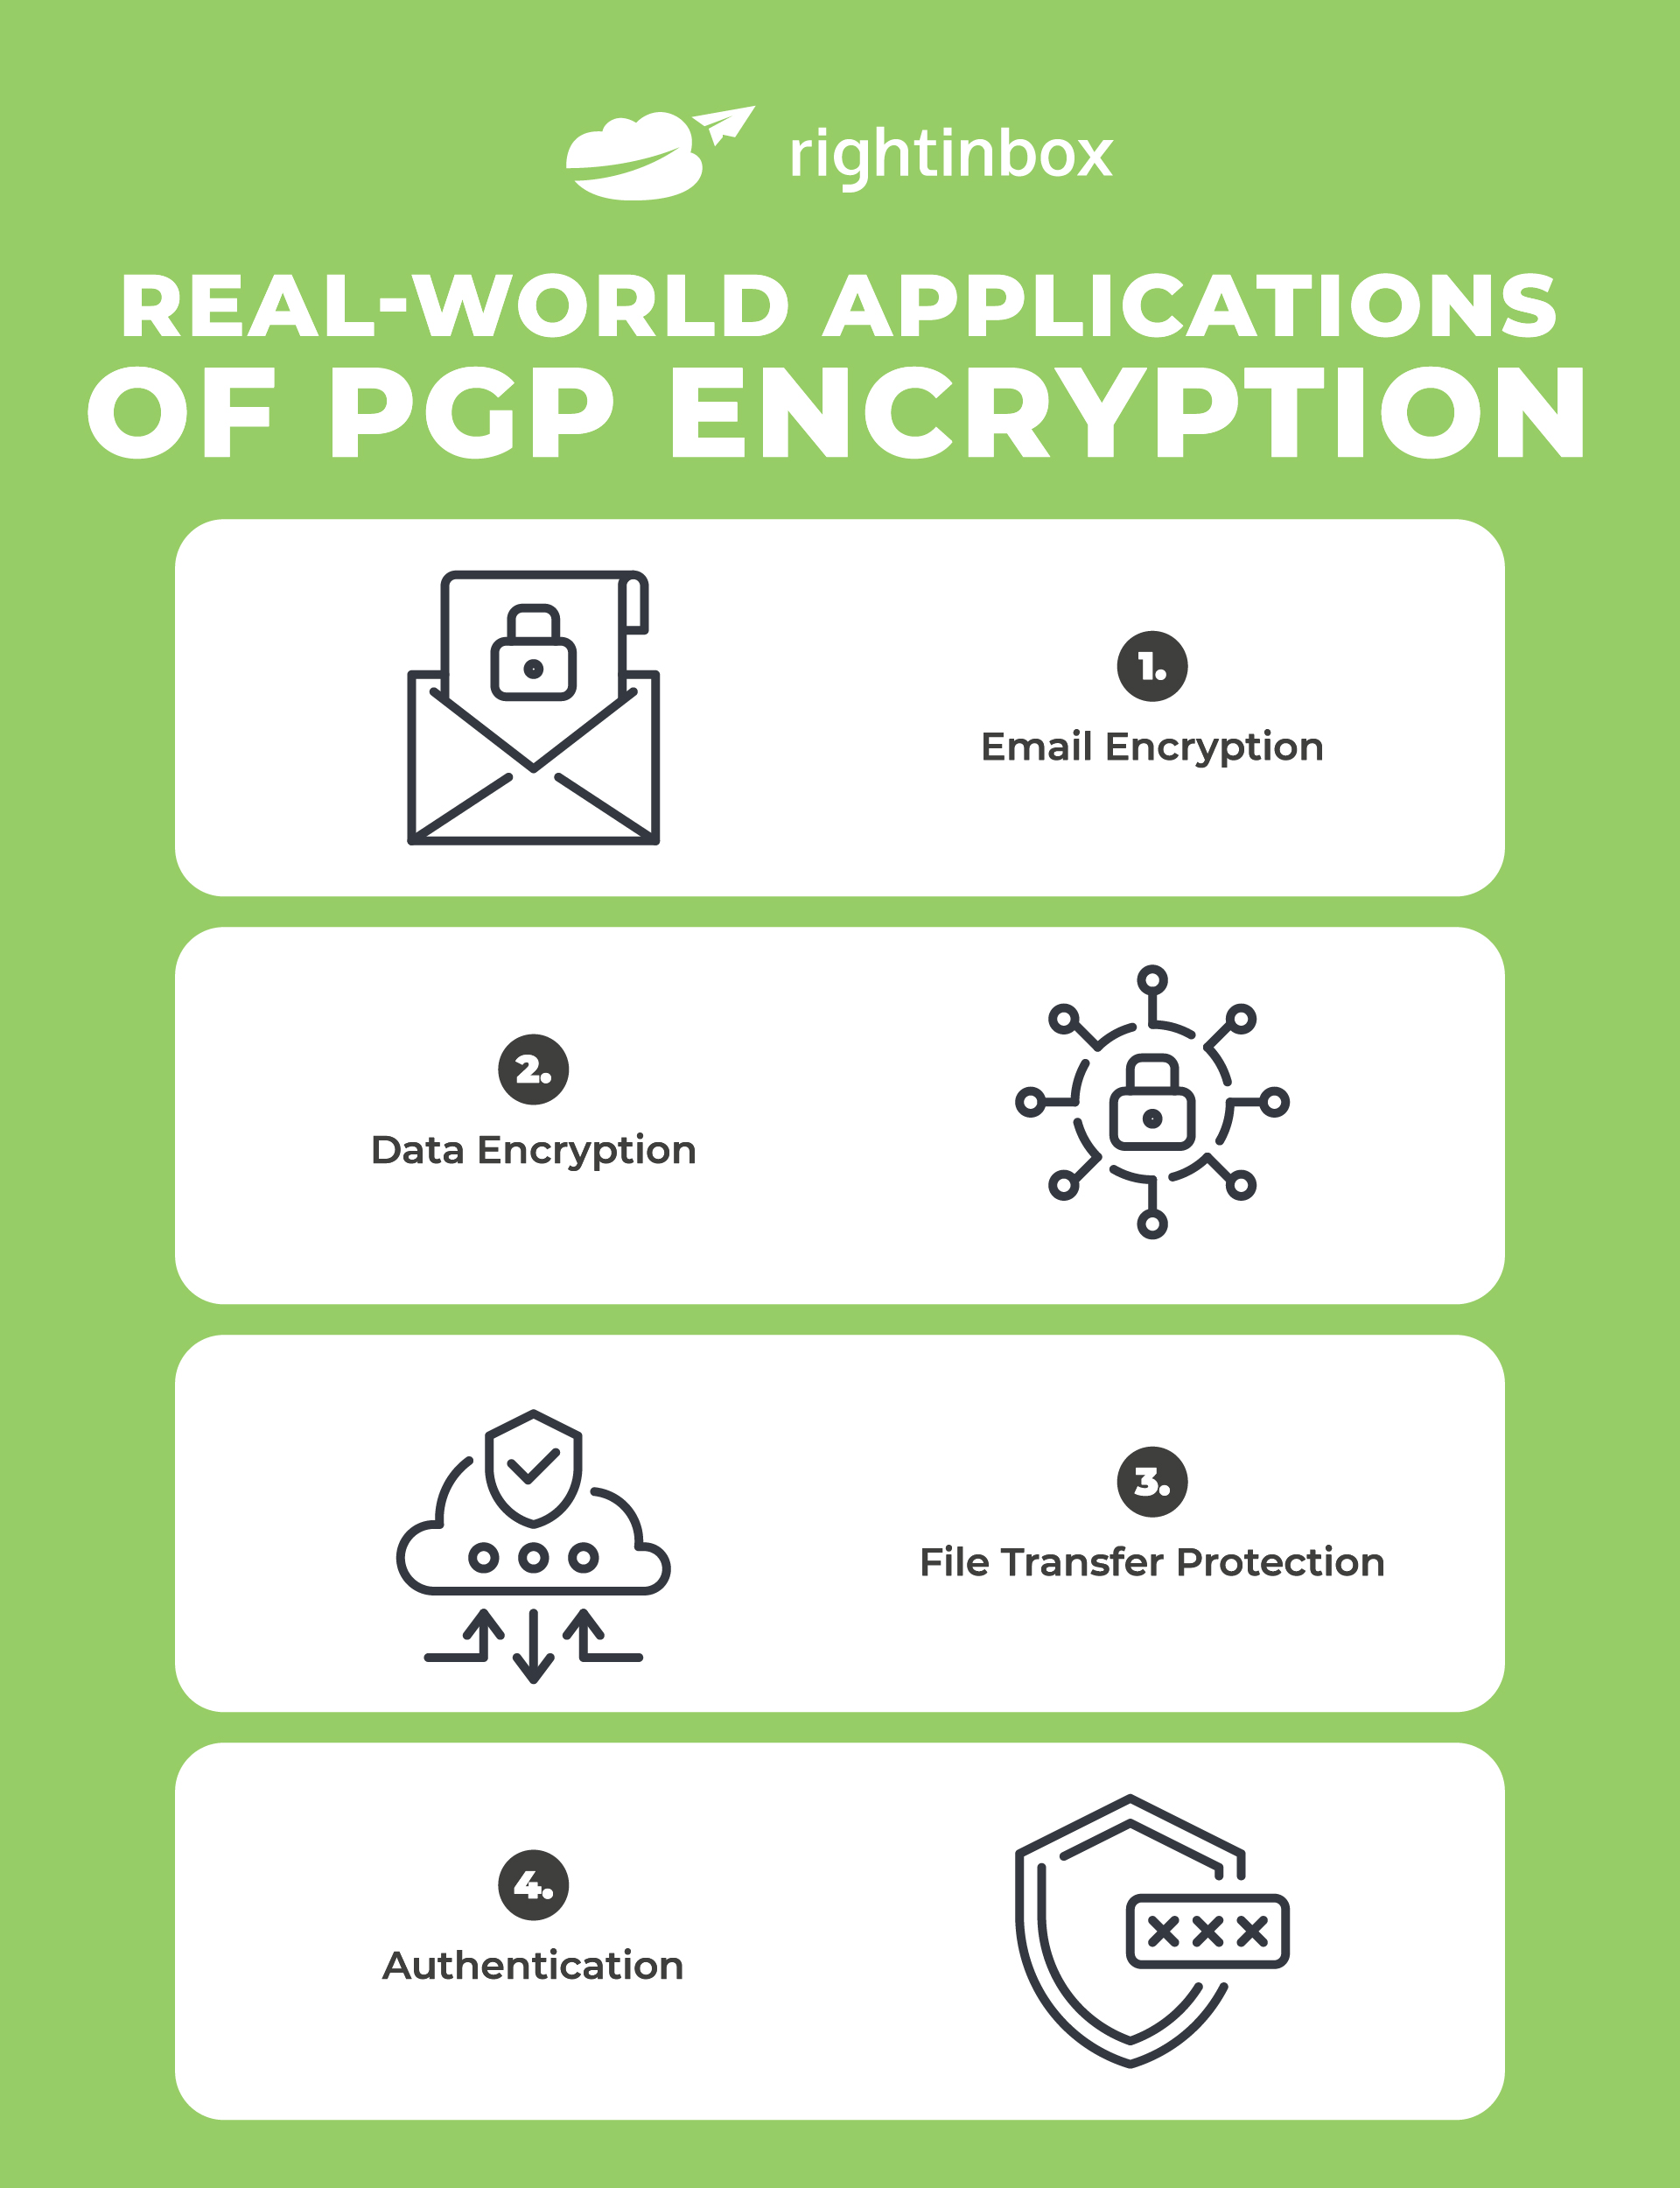 4 real world applications of PGP Encryption